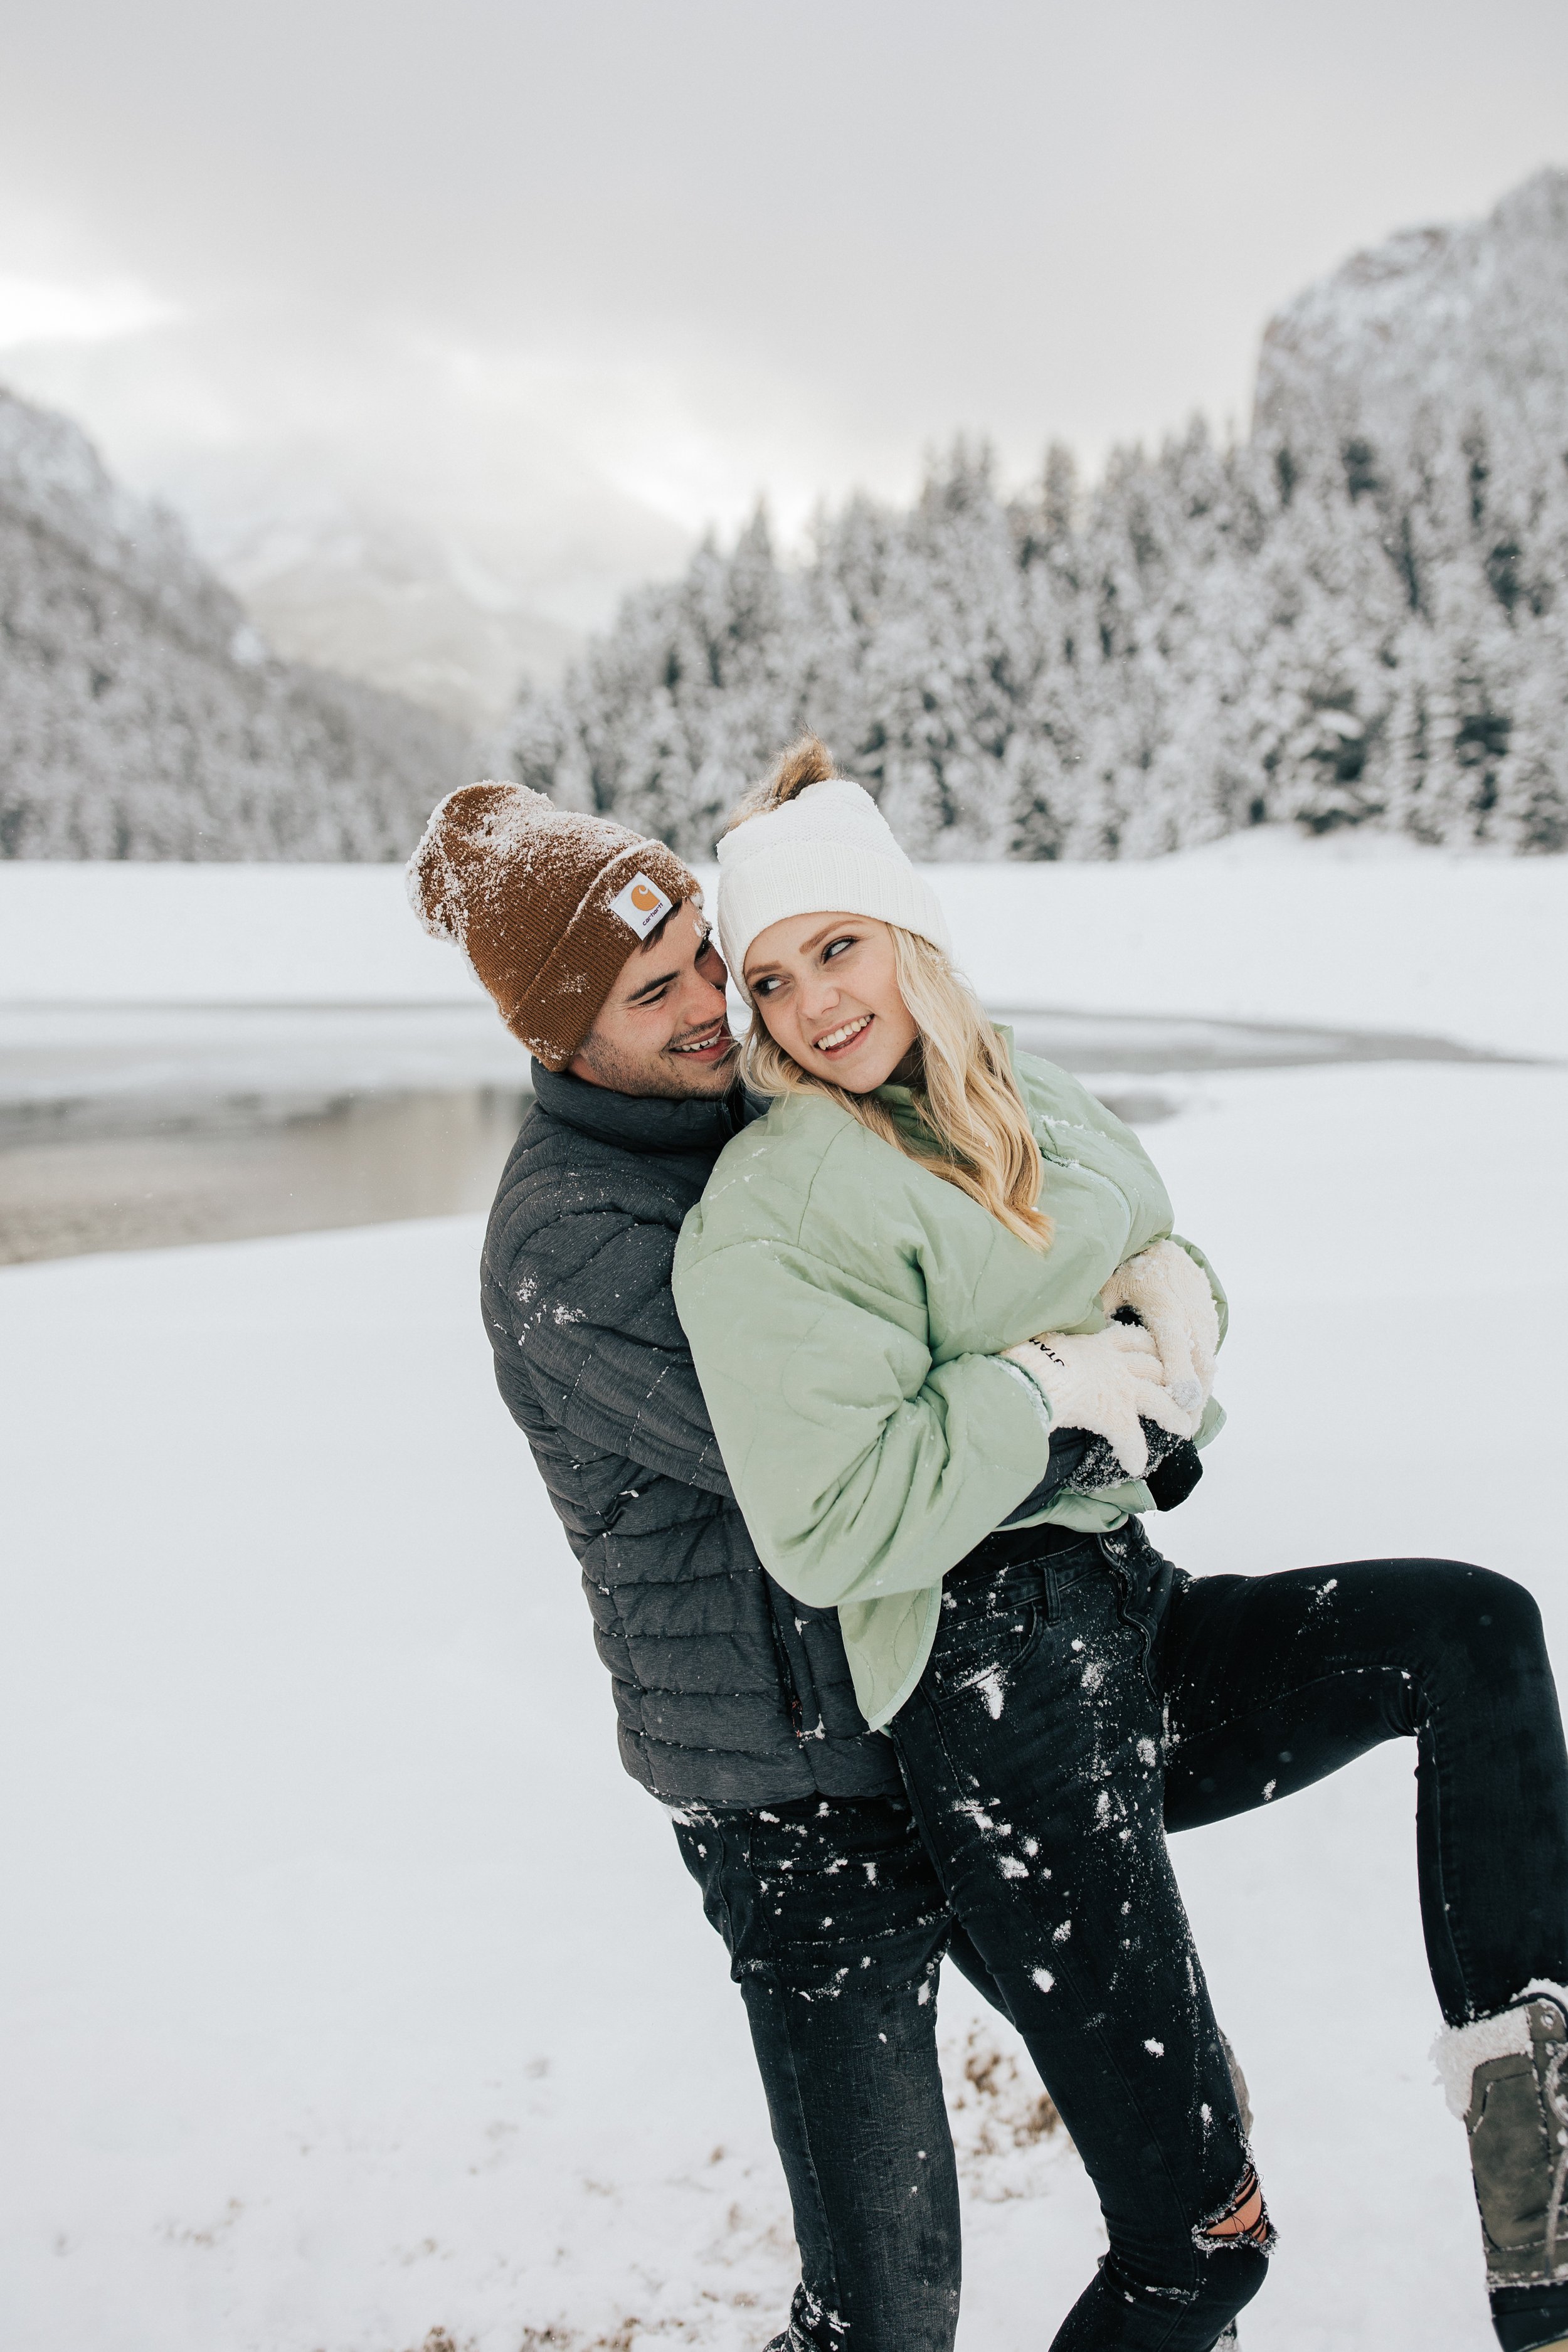  Snowball fight during couples photoshoot in the Utah mountains couple hugs as it's snowing covered in snowflakes engagement session winter outfit inspo #outfitinspo #parkcityphotographer #engagements #winterengagements  